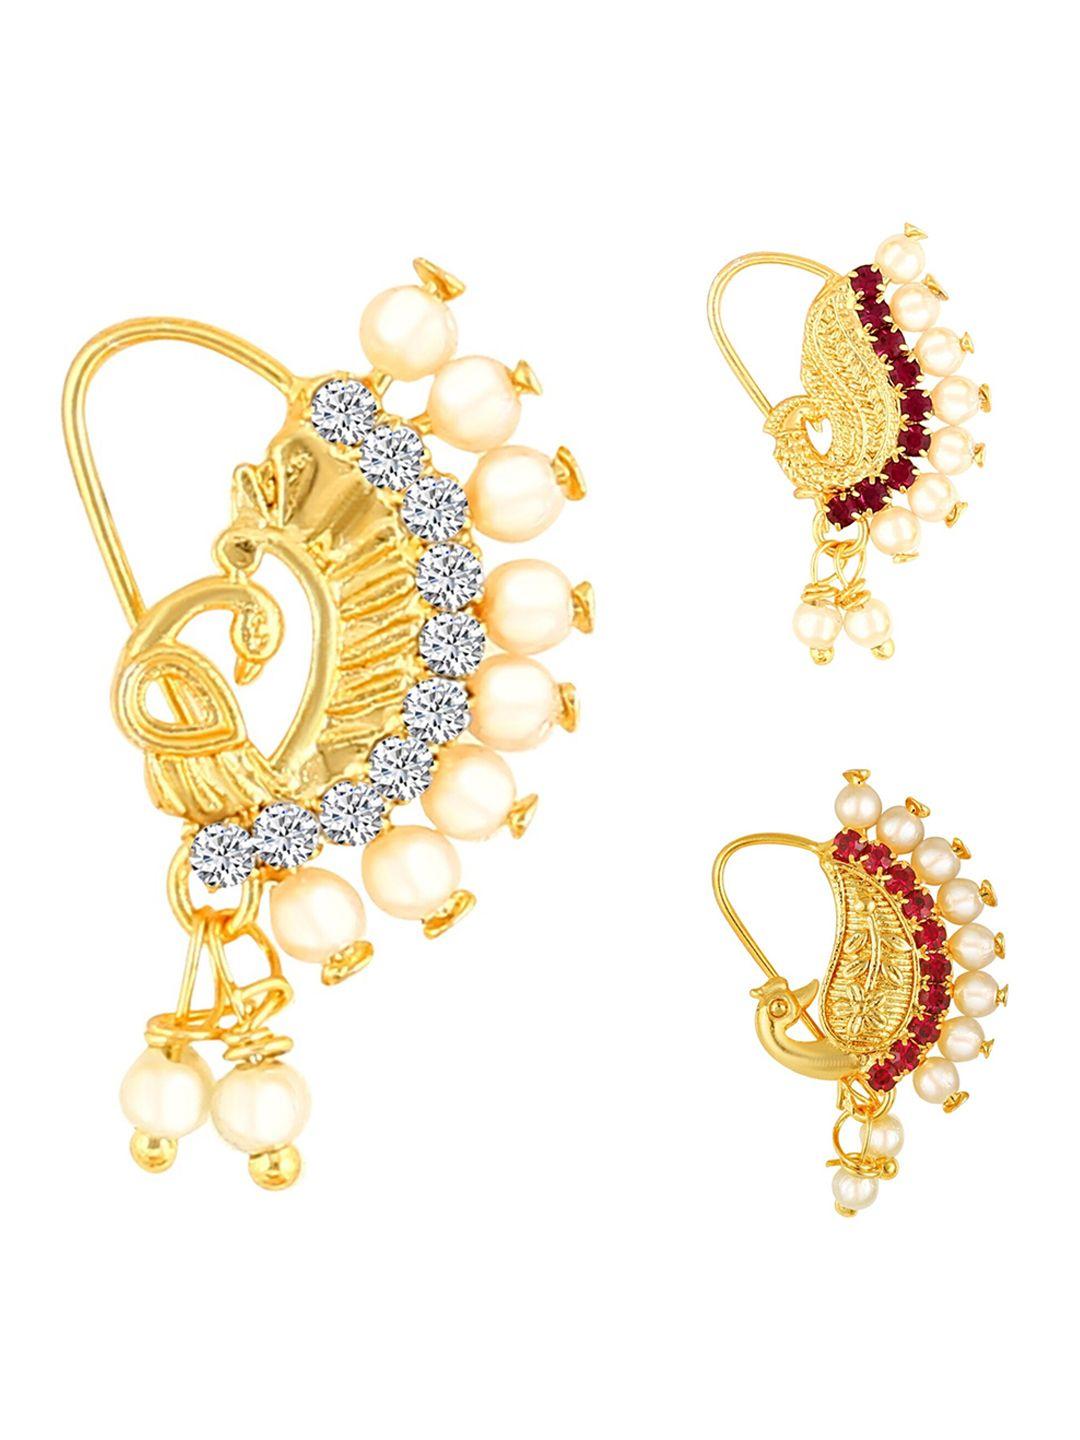 vighnaharta set of 3 gold-plated ad-studded & beaded nosepins